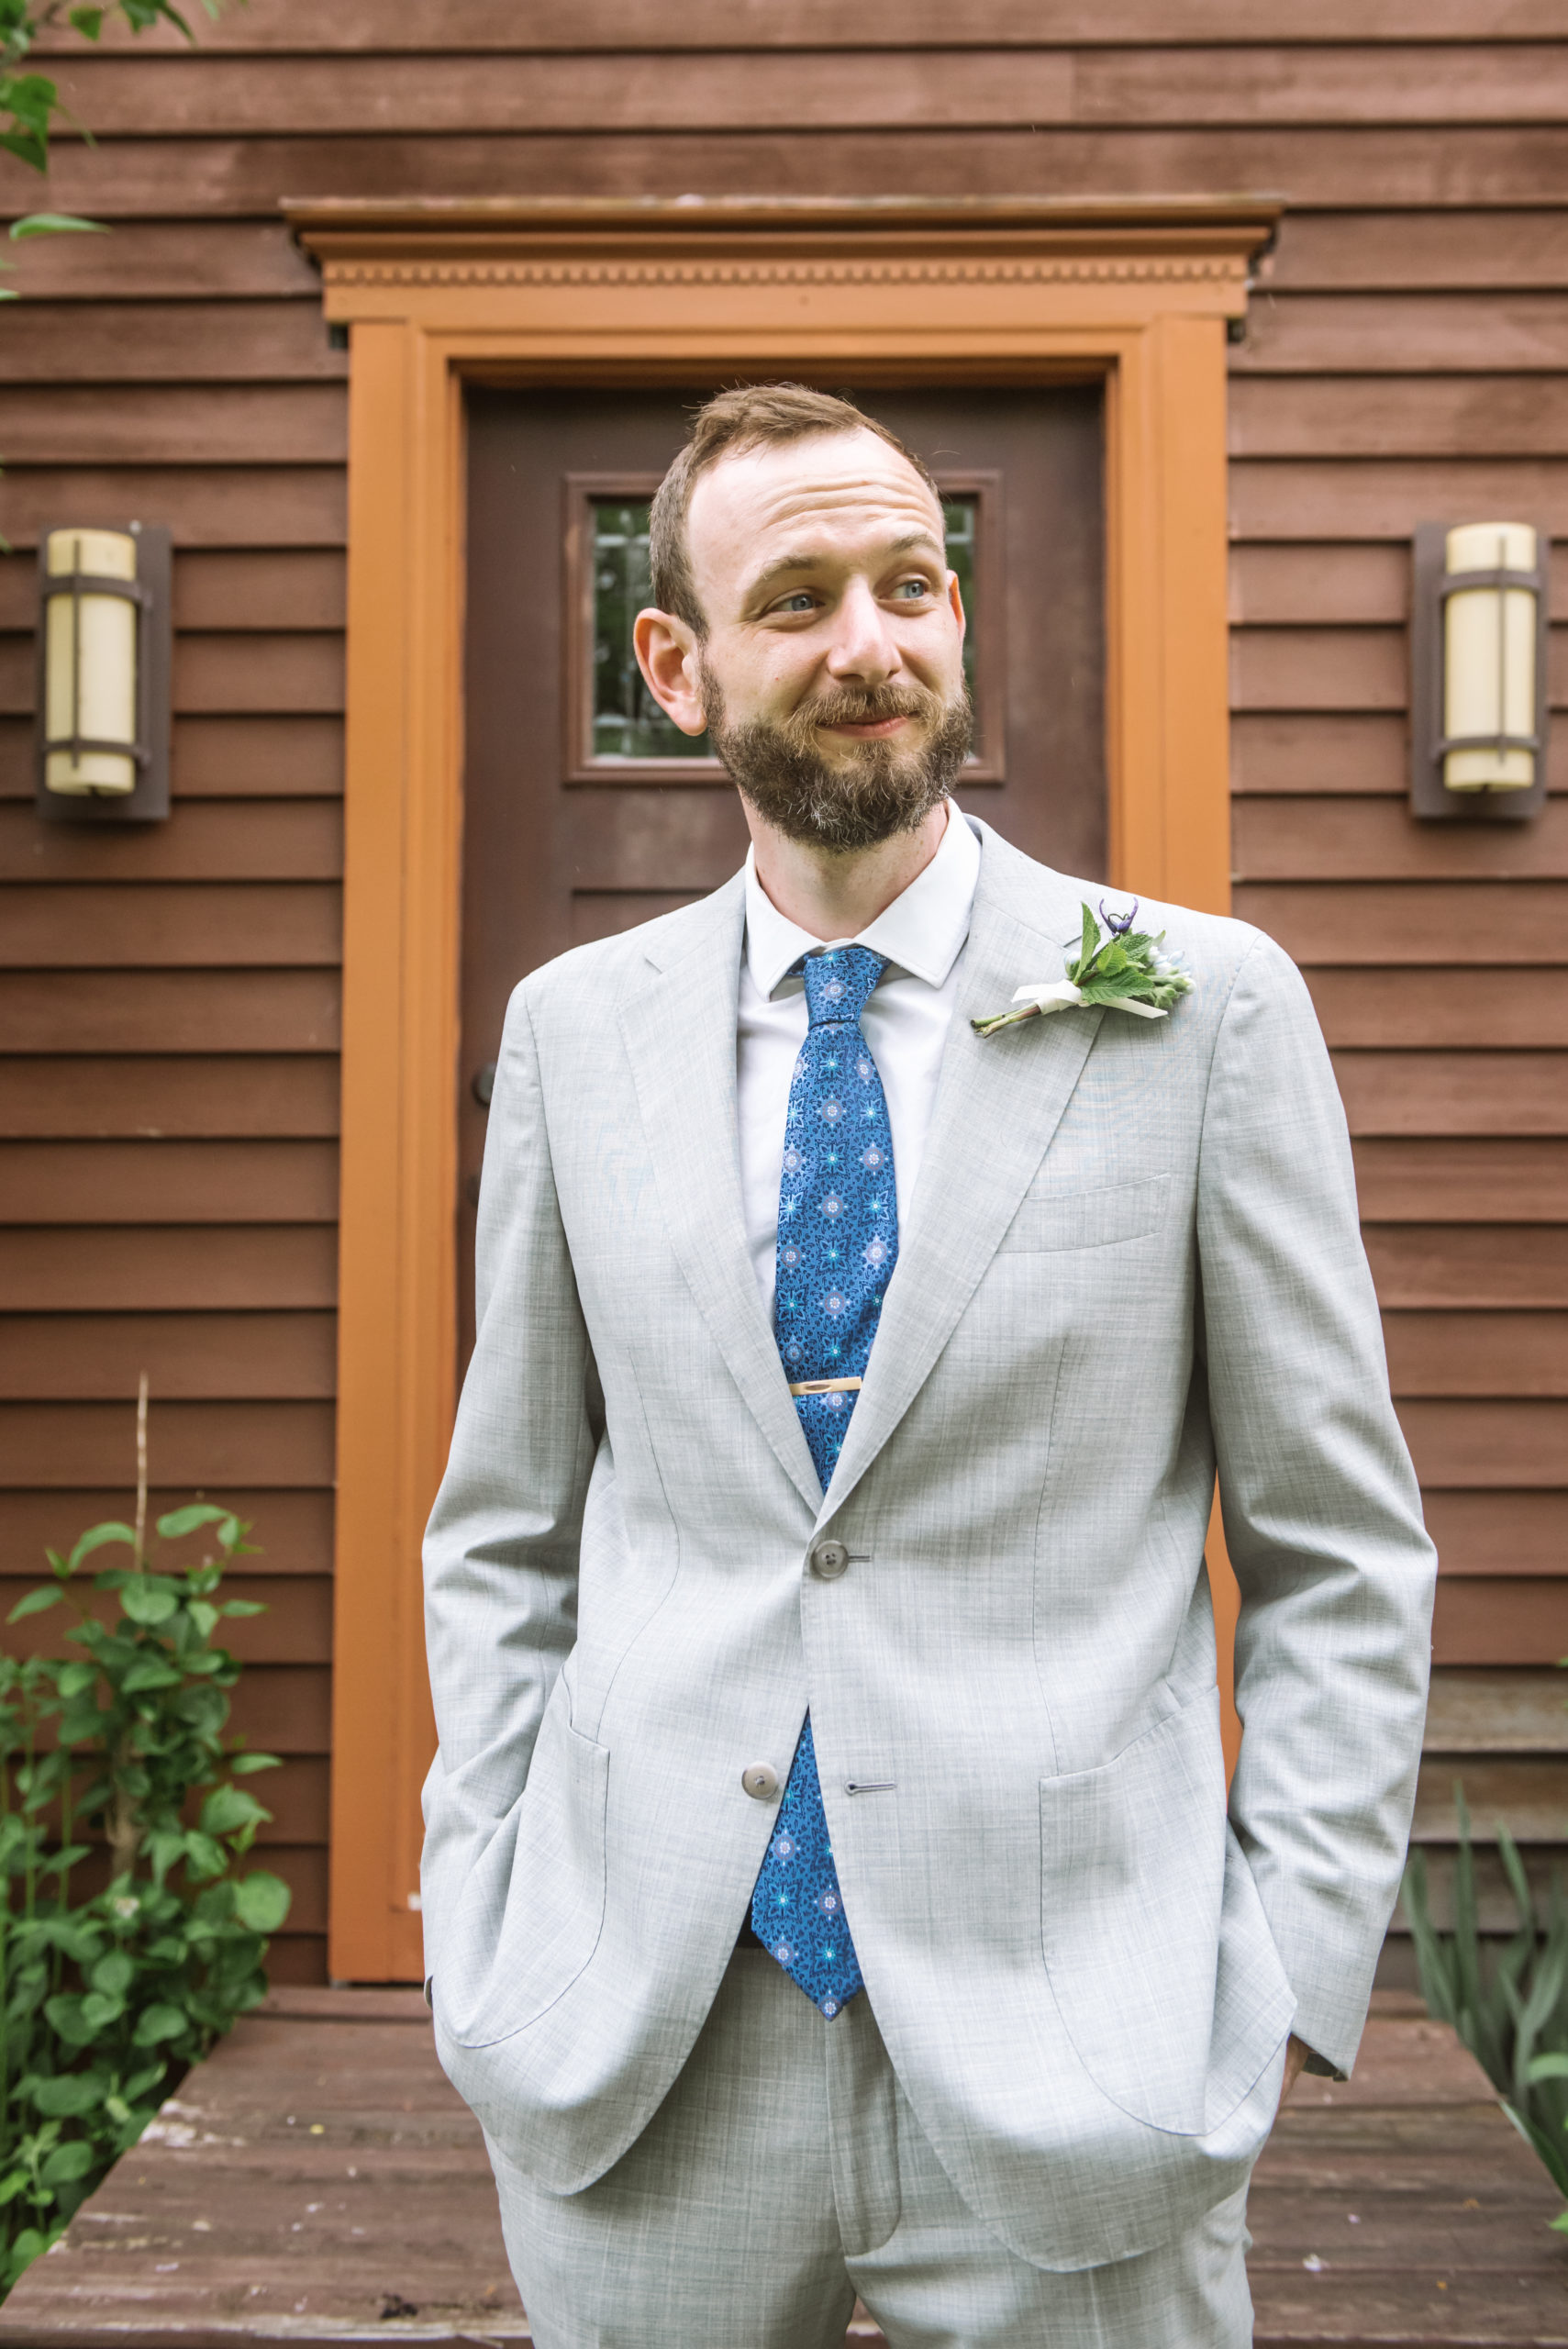 Groom wearing a light grey suit, blue patterned tie, gold tie clip, white collared shirt, and a boutonniere looking off to his left with a soft smile on his face. He is standing in front of a dark red wood house's front door with greenery and trees surrounding the facade.